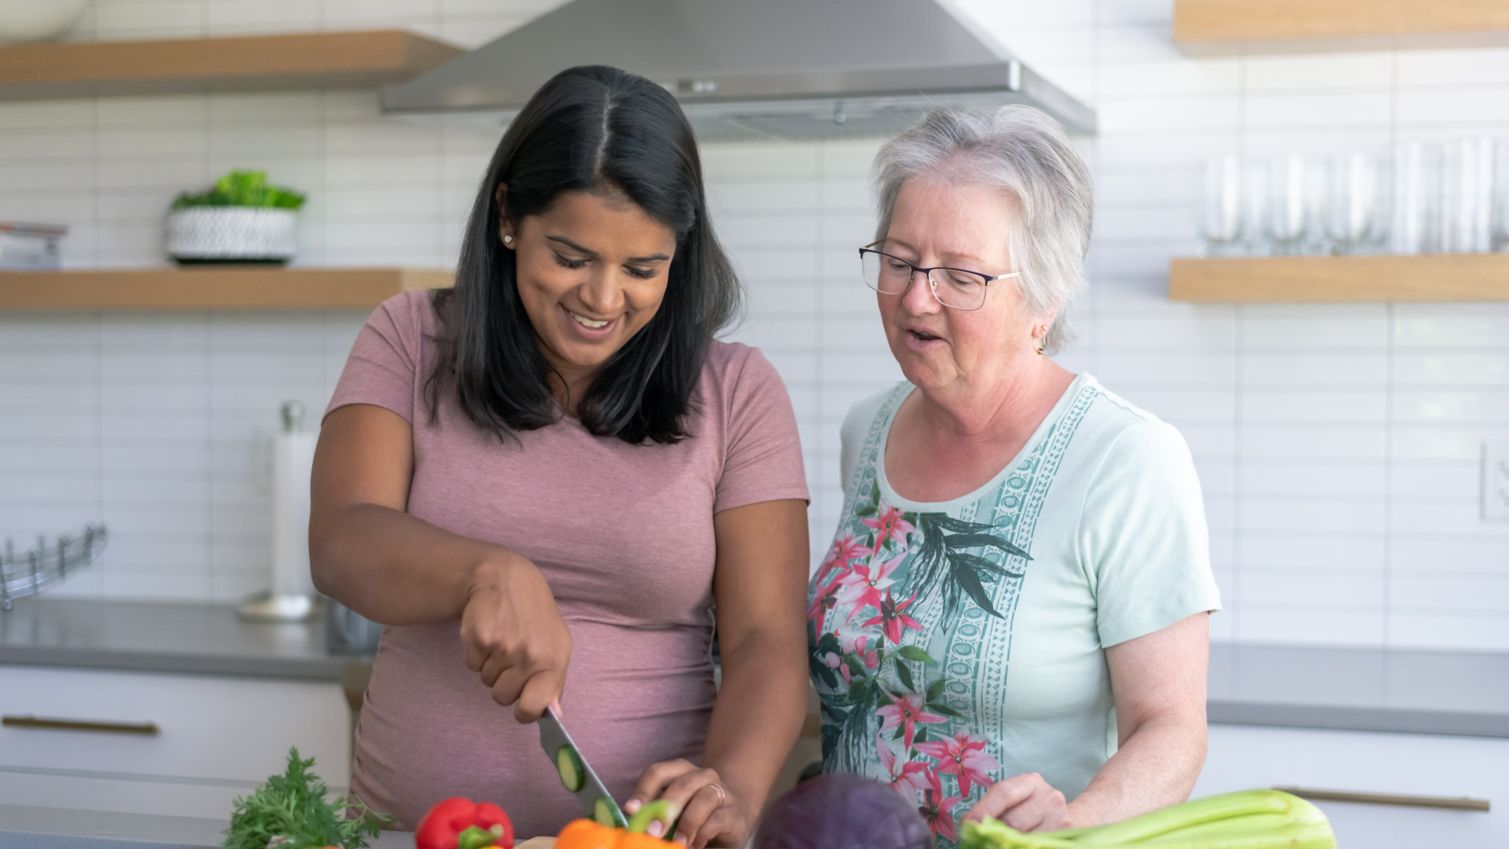 Pregnant woman chops vegetables on kitchen counter as older woman looks on